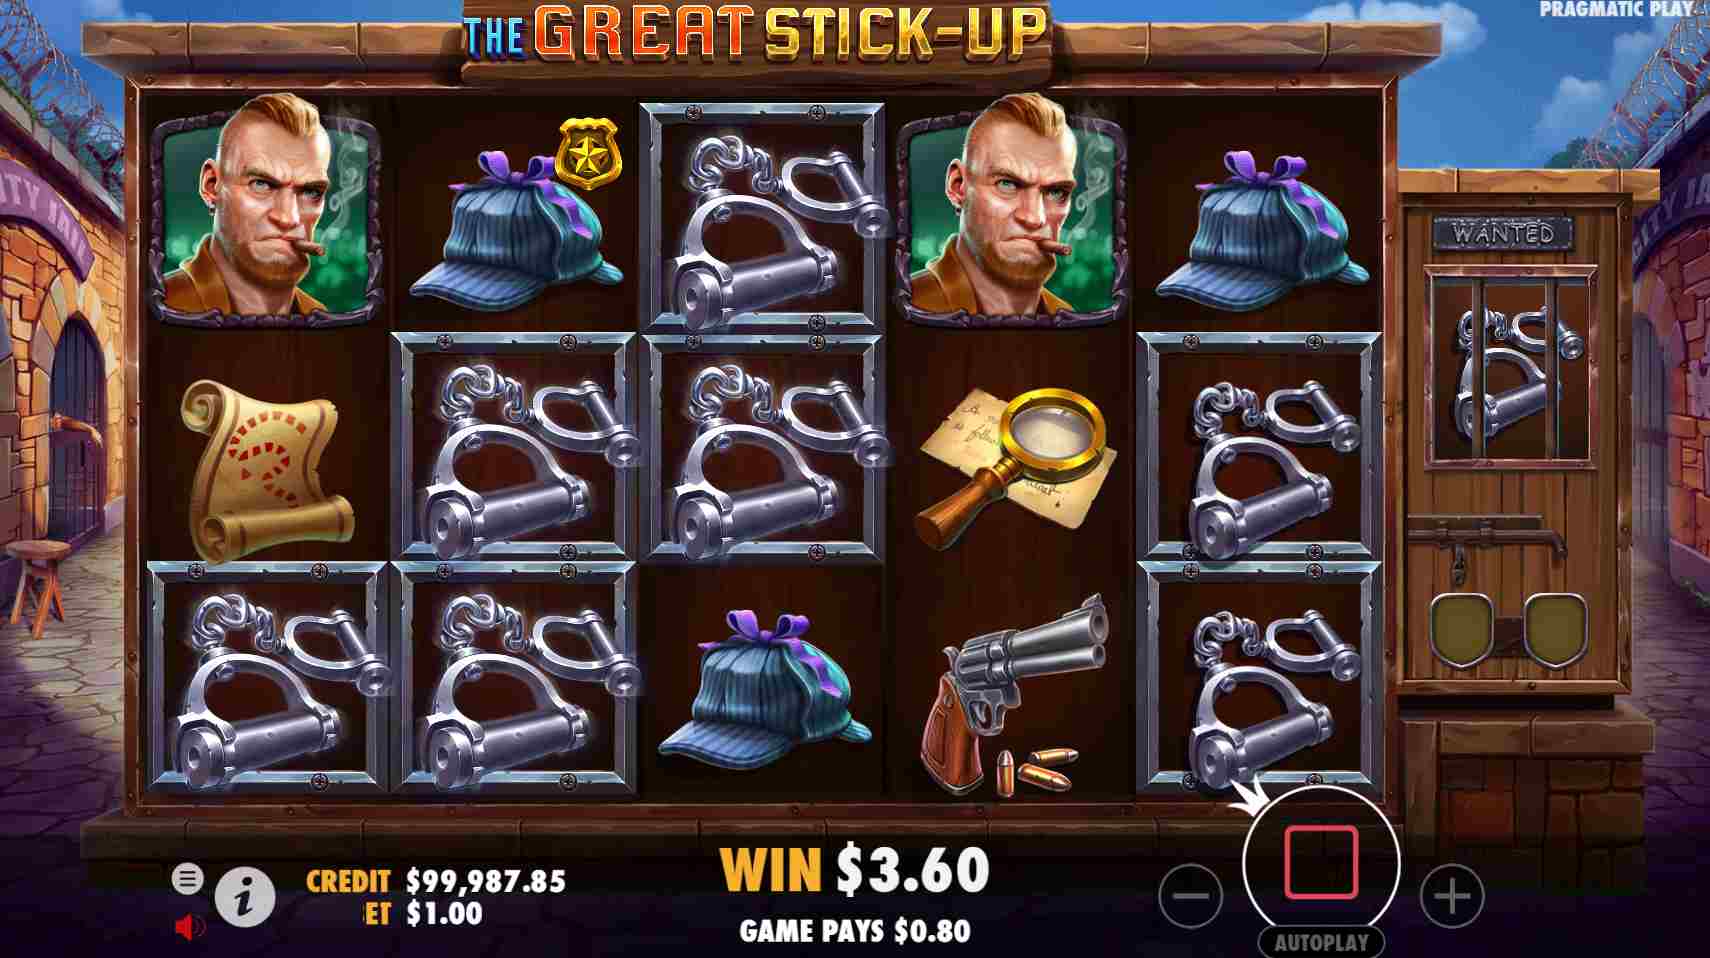 The Great Stick-Up Free Spins